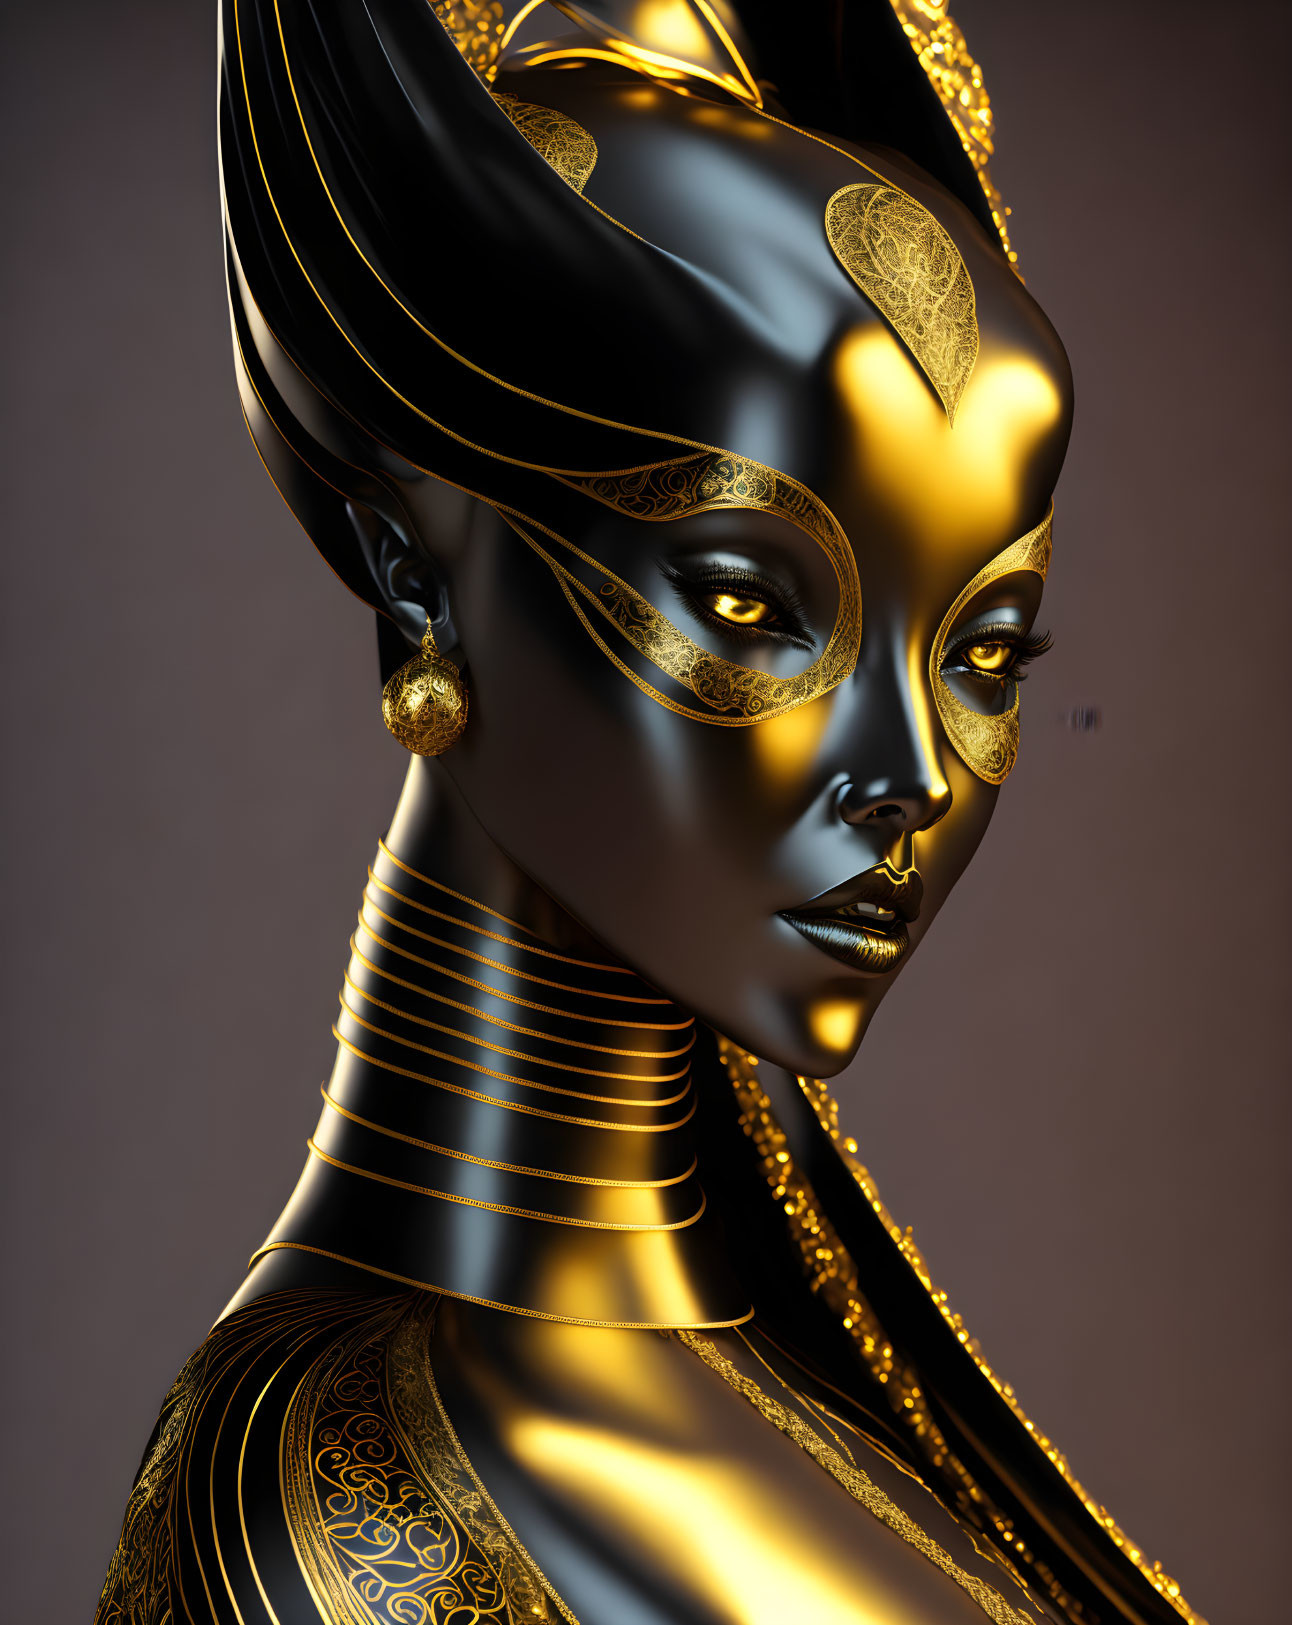 Woman in 3D digital art with golden skin accents and ornate headpiece on muted backdrop